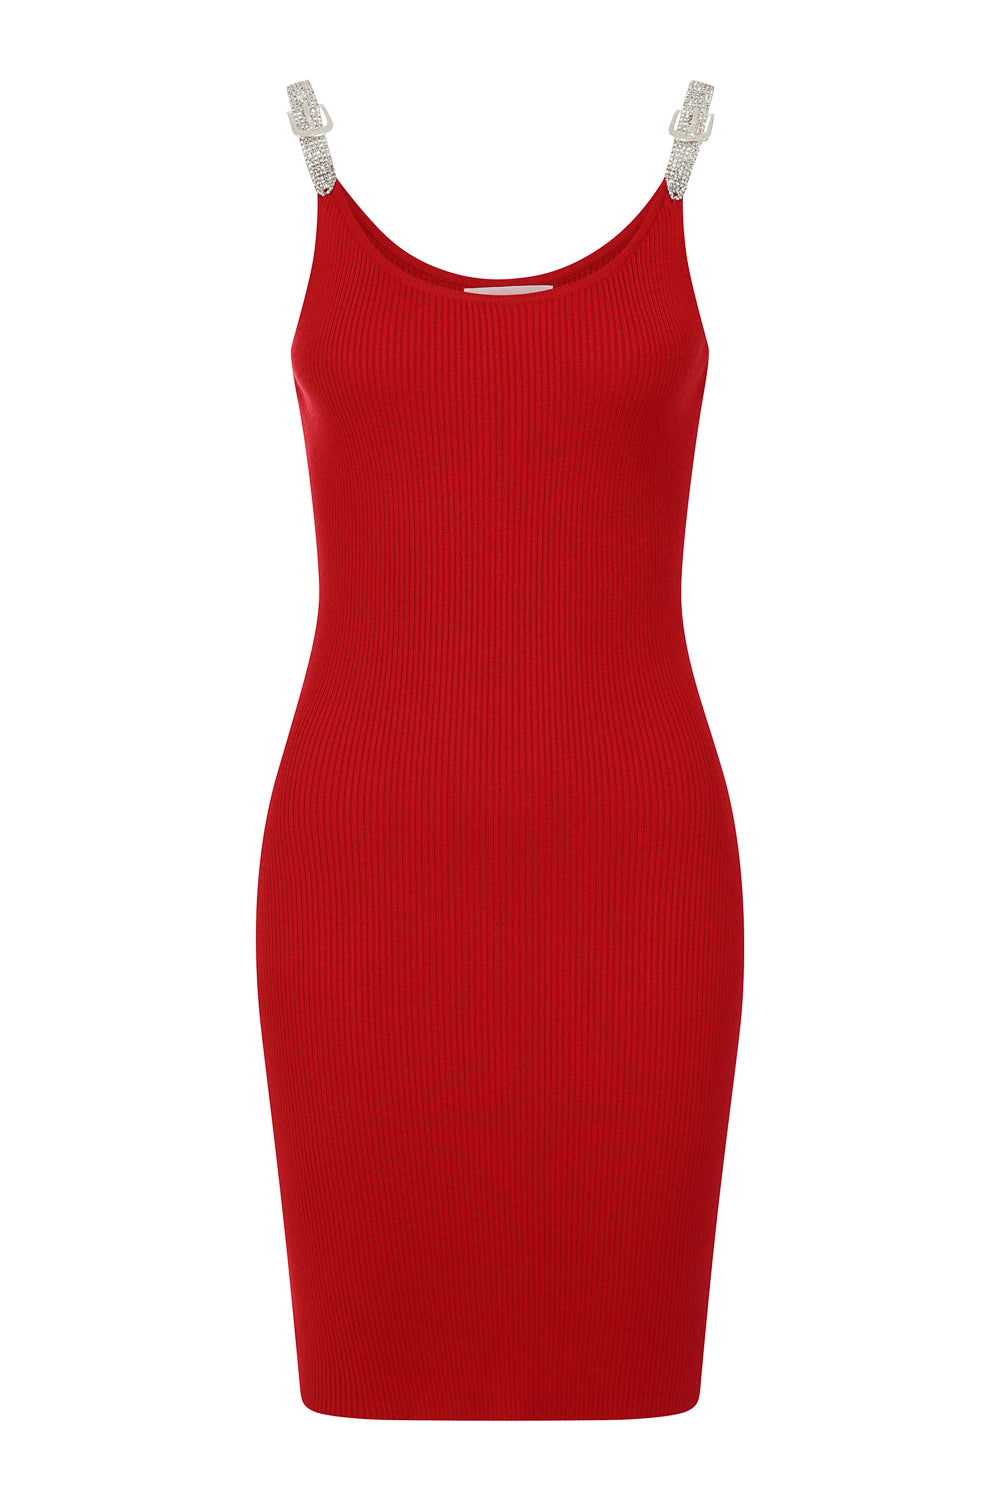 Angelina Red Diamante Strap Ribbed Knitted Pencil Midi Bodycon Dress